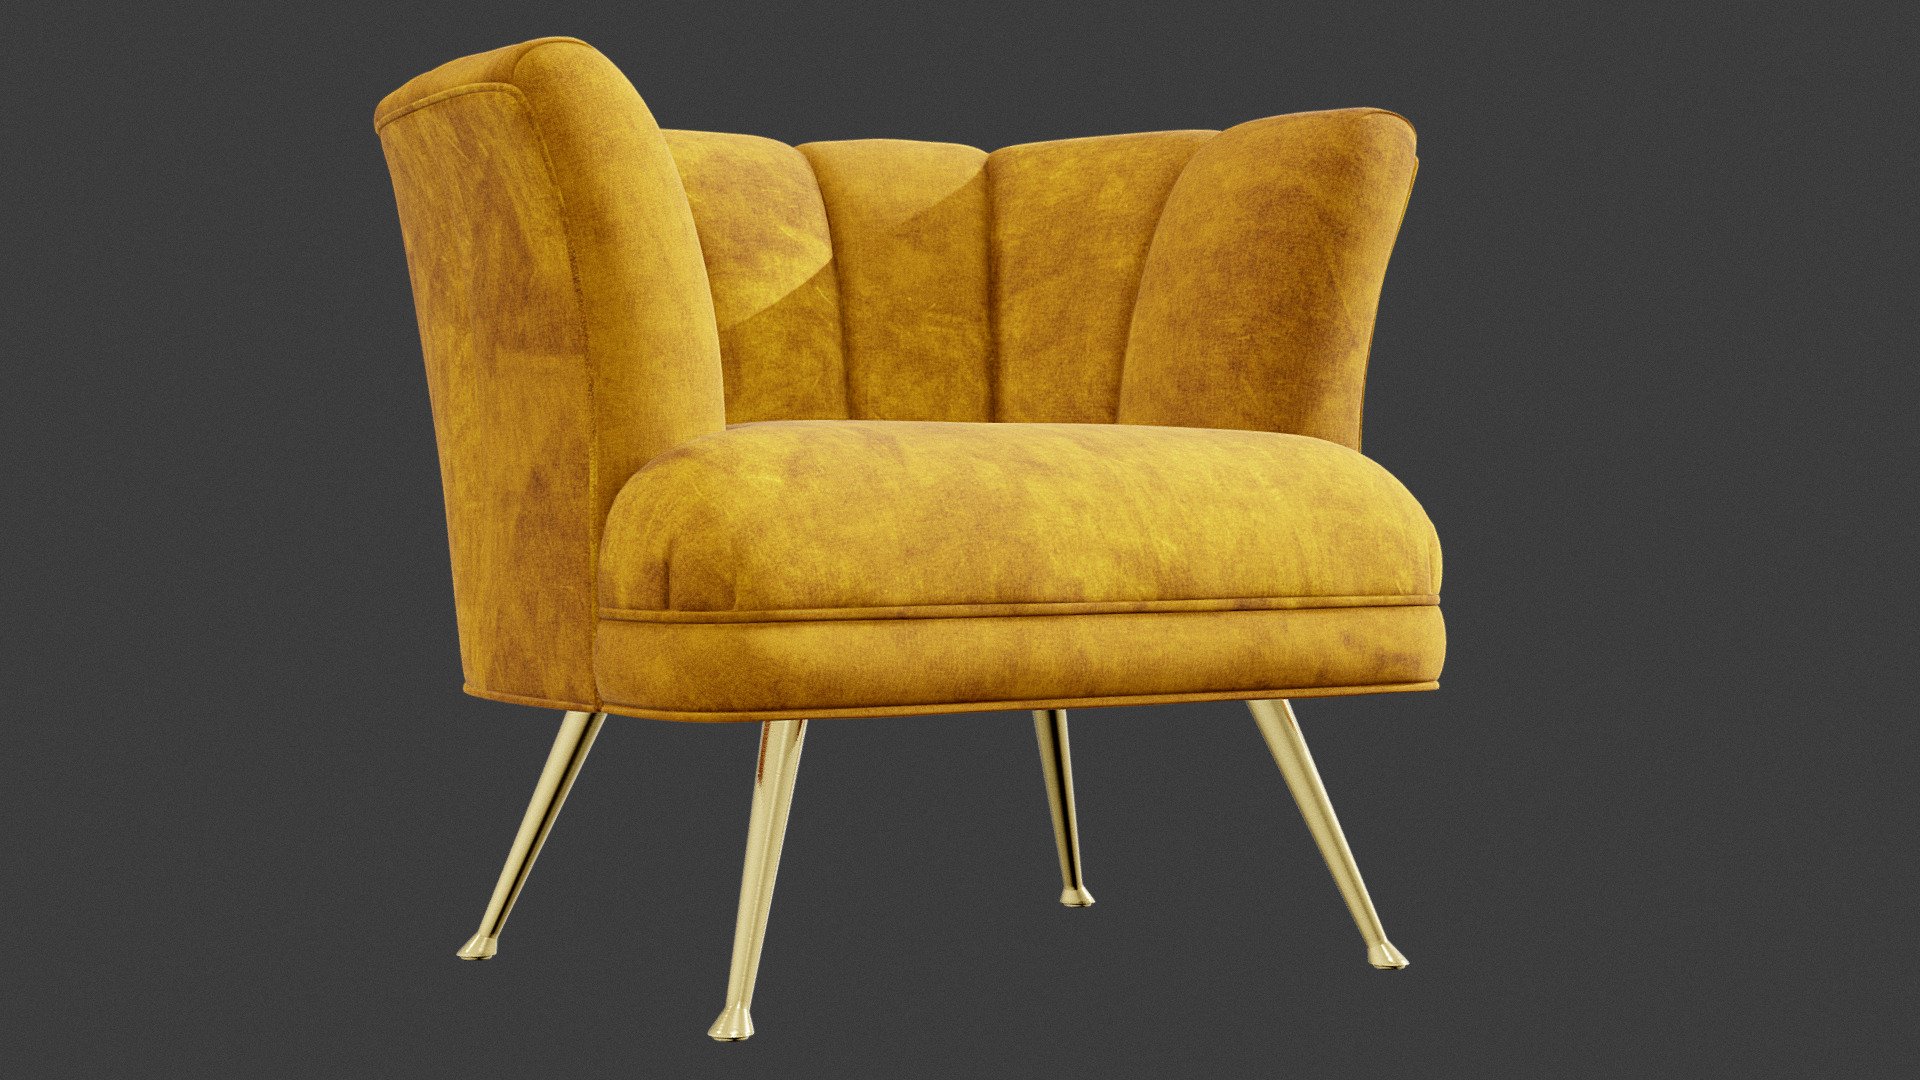 -no plugins/modifiers etc

-model fully UVs unwrapped 

-diffuse texture size: 8192x8192

-model was made in real size

-scene units measurement: millimeters

-dimensions: 71.8 H x 85.2 W x 72.1 D (cm)
 - Tulip Chair - 3D model by TypicCube 3d model